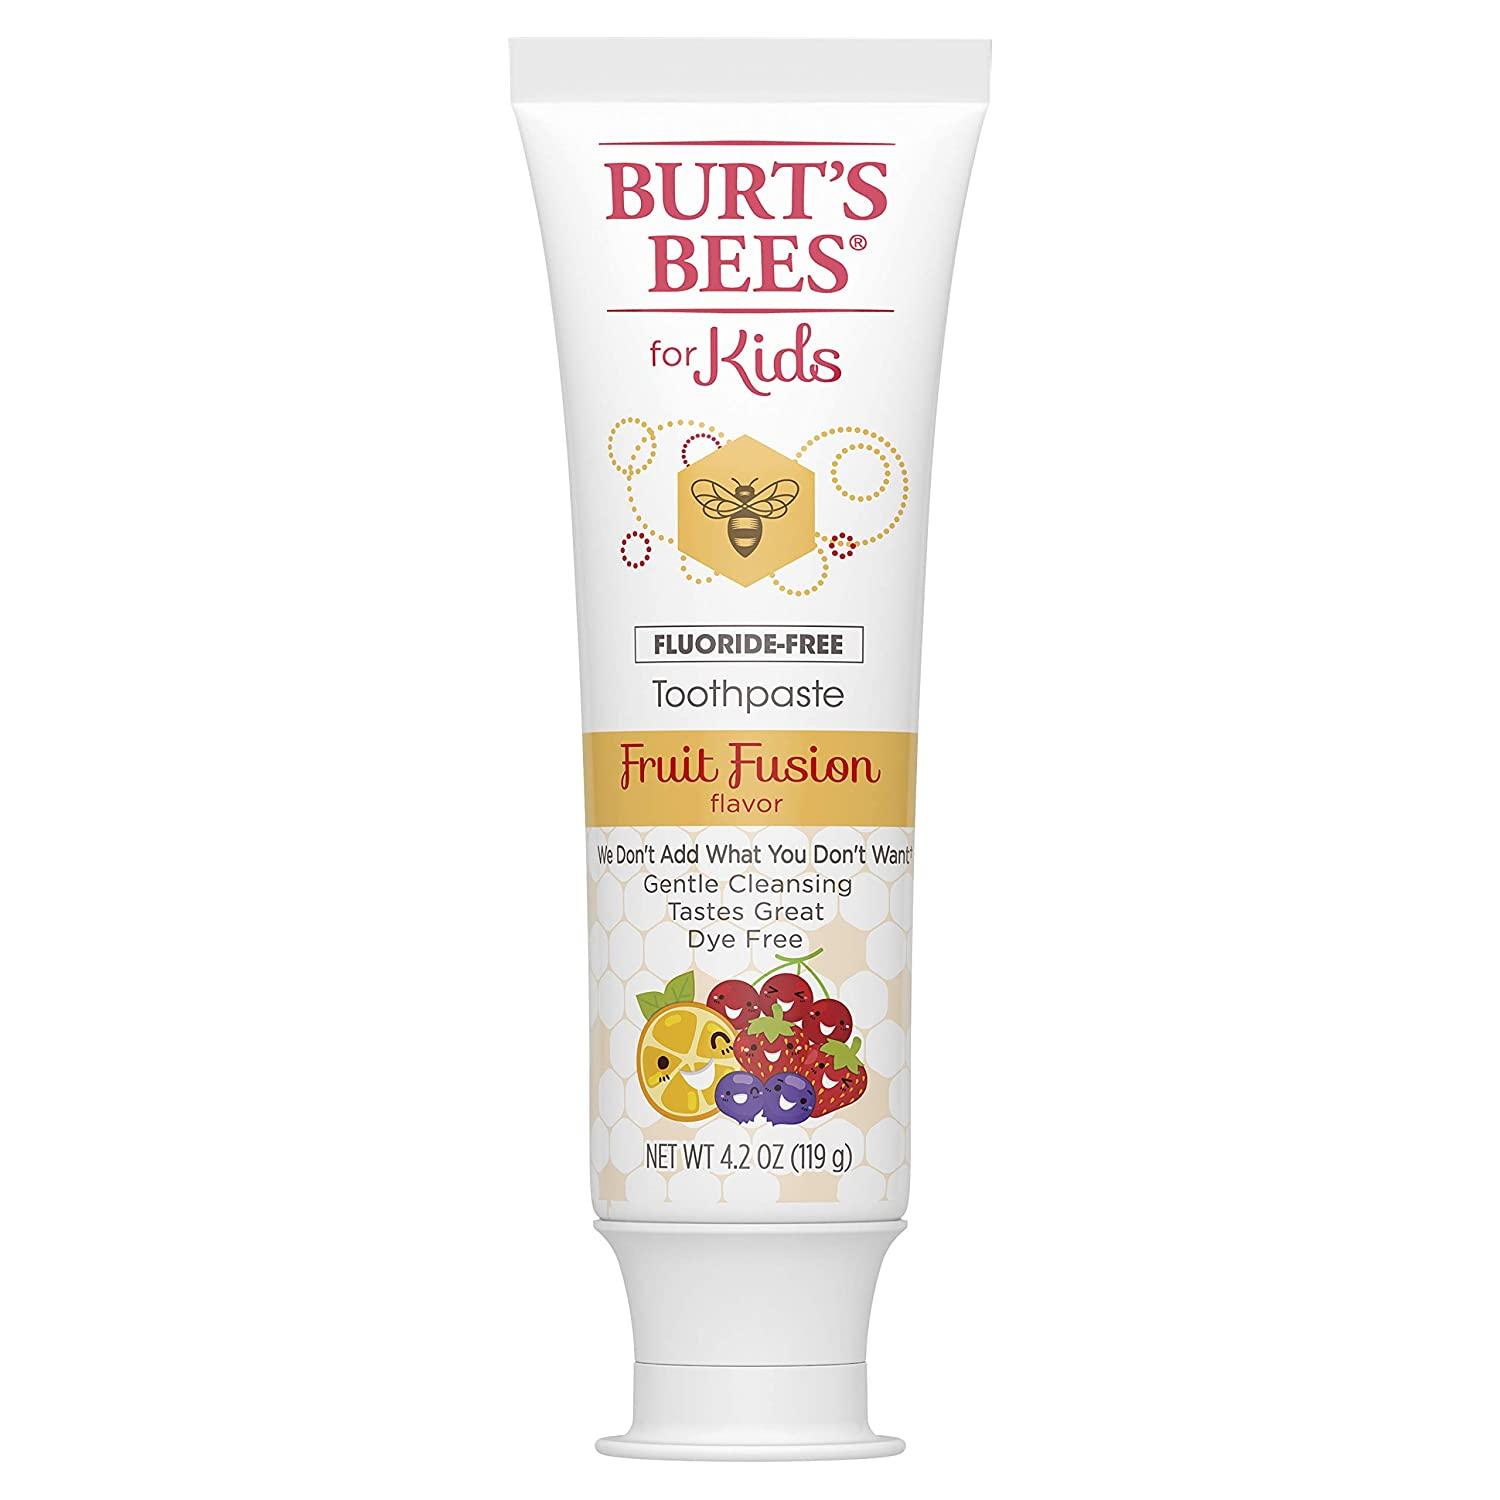 3 Burts Bees Kids Toothpaste for $5.49 Shipped